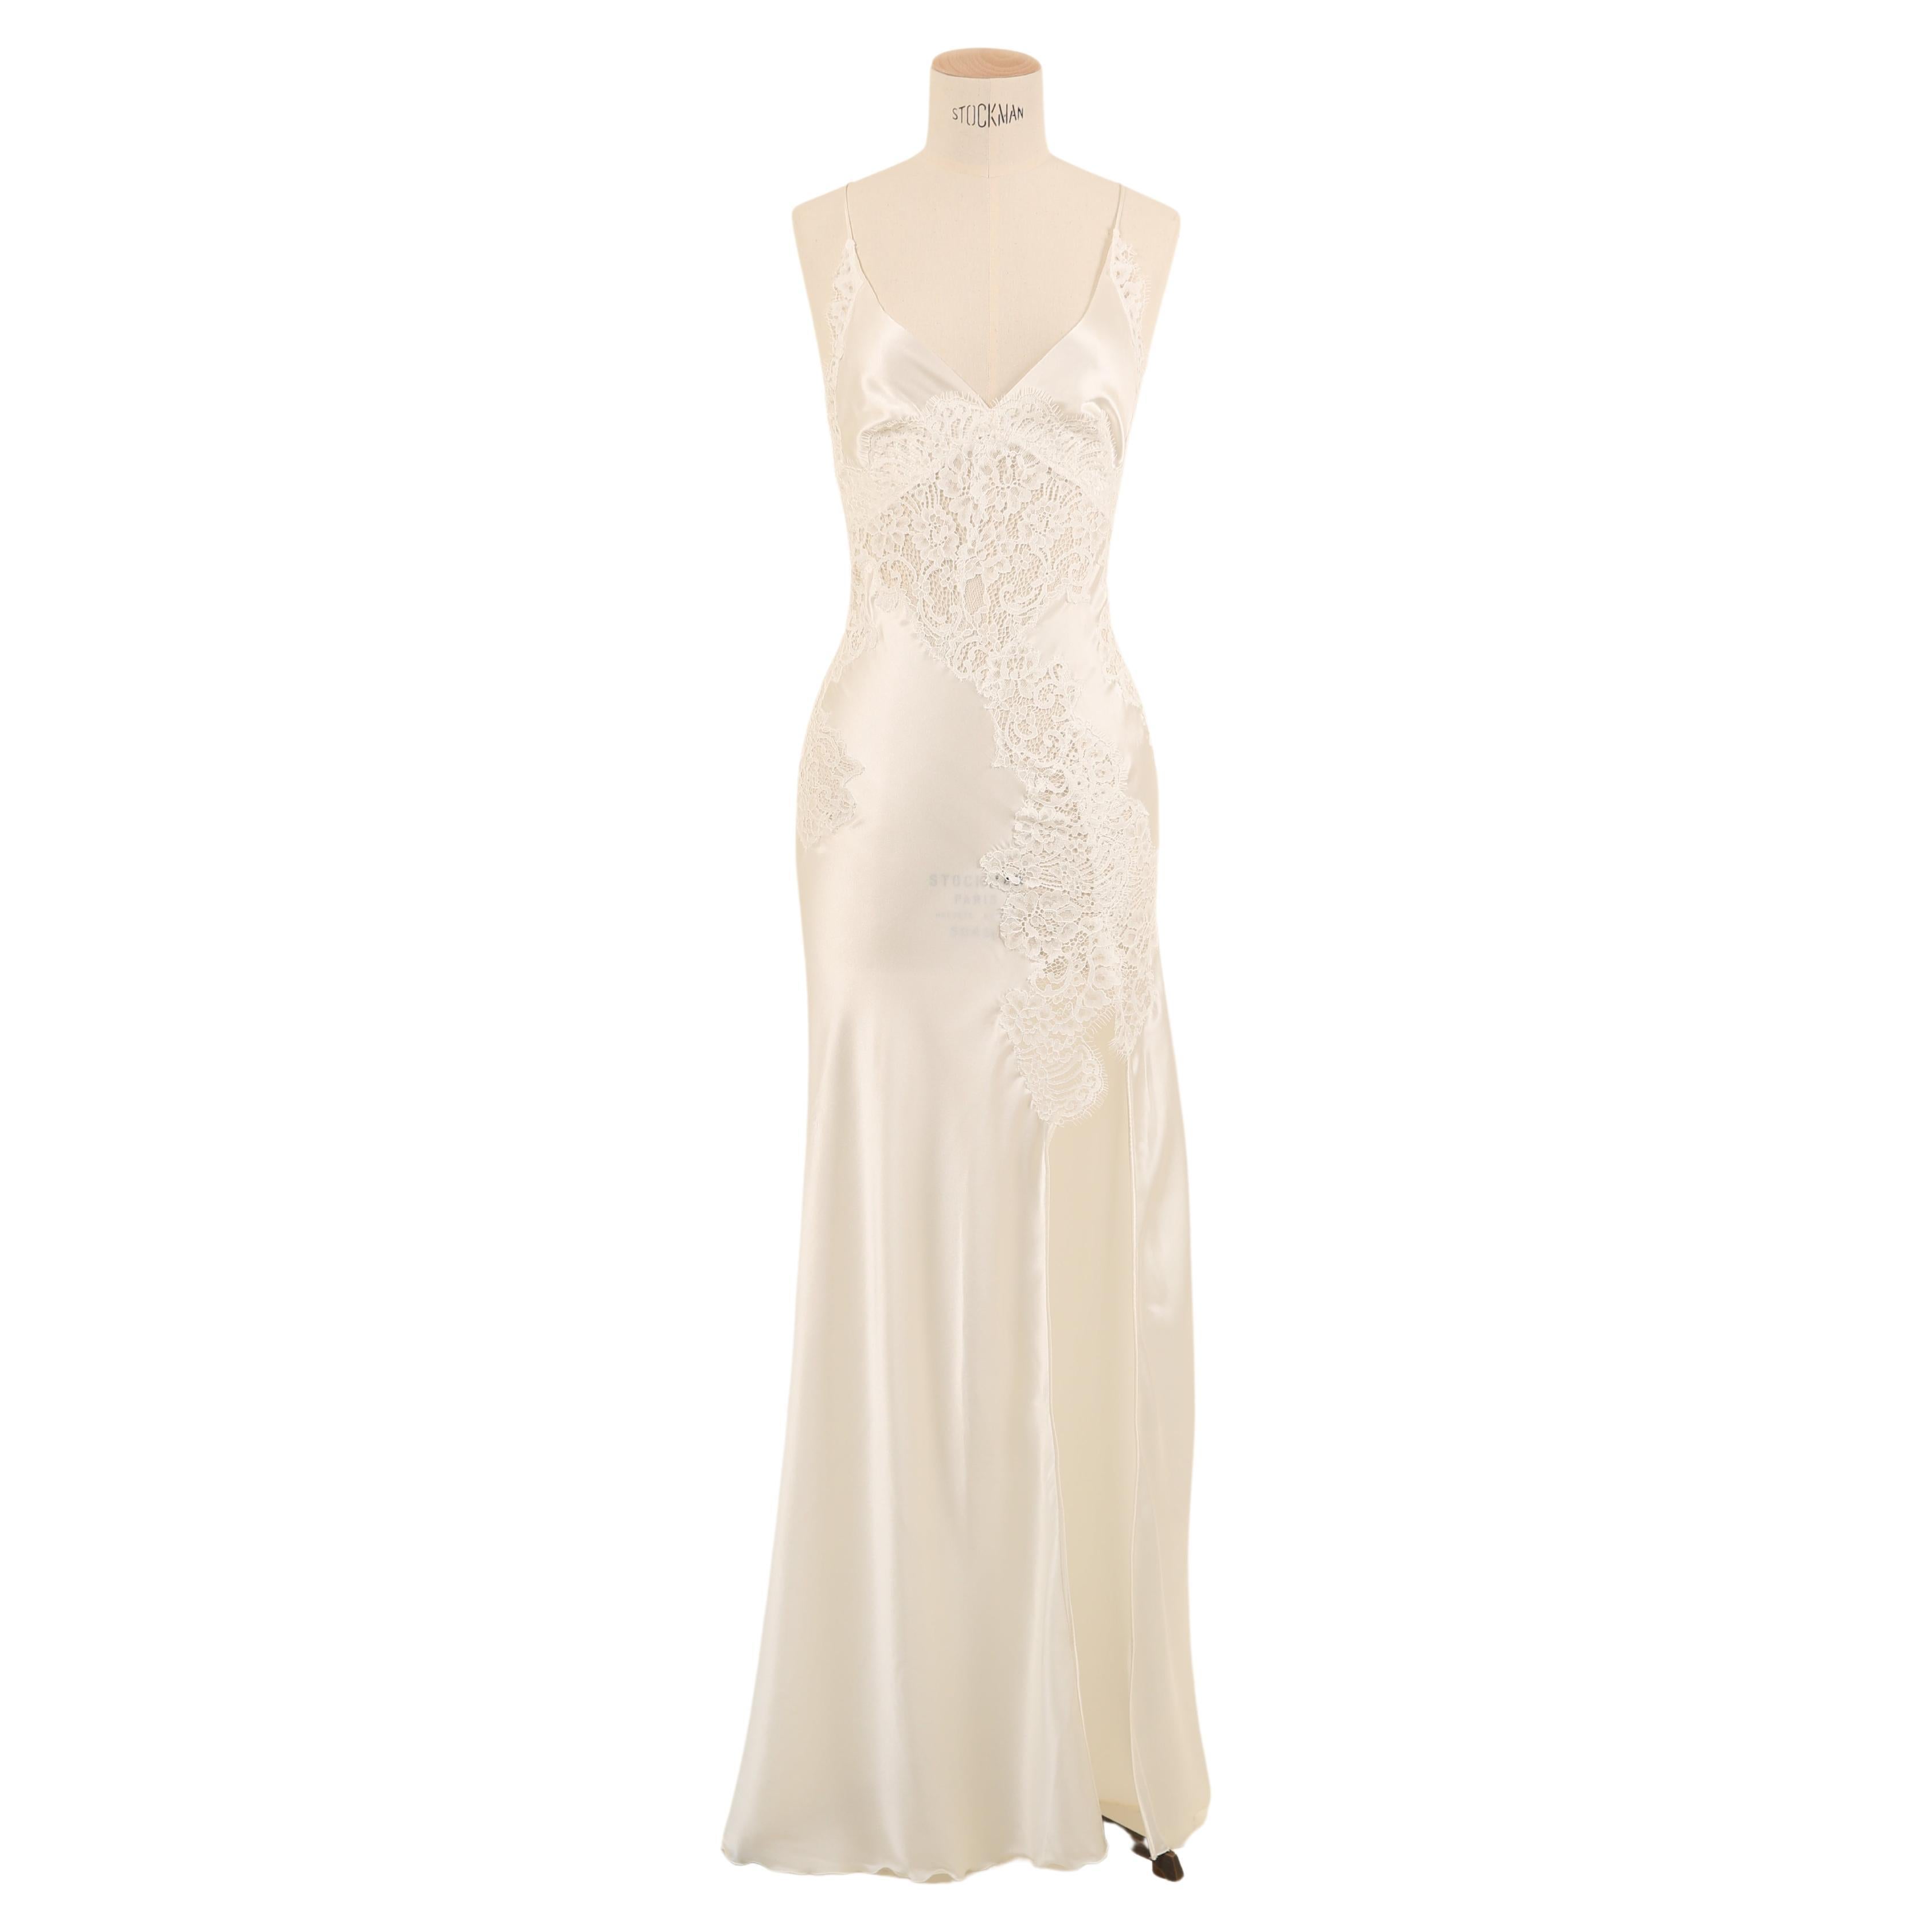 Ermanno Scervino ivory white silk lace plunging slit night gown backless dress